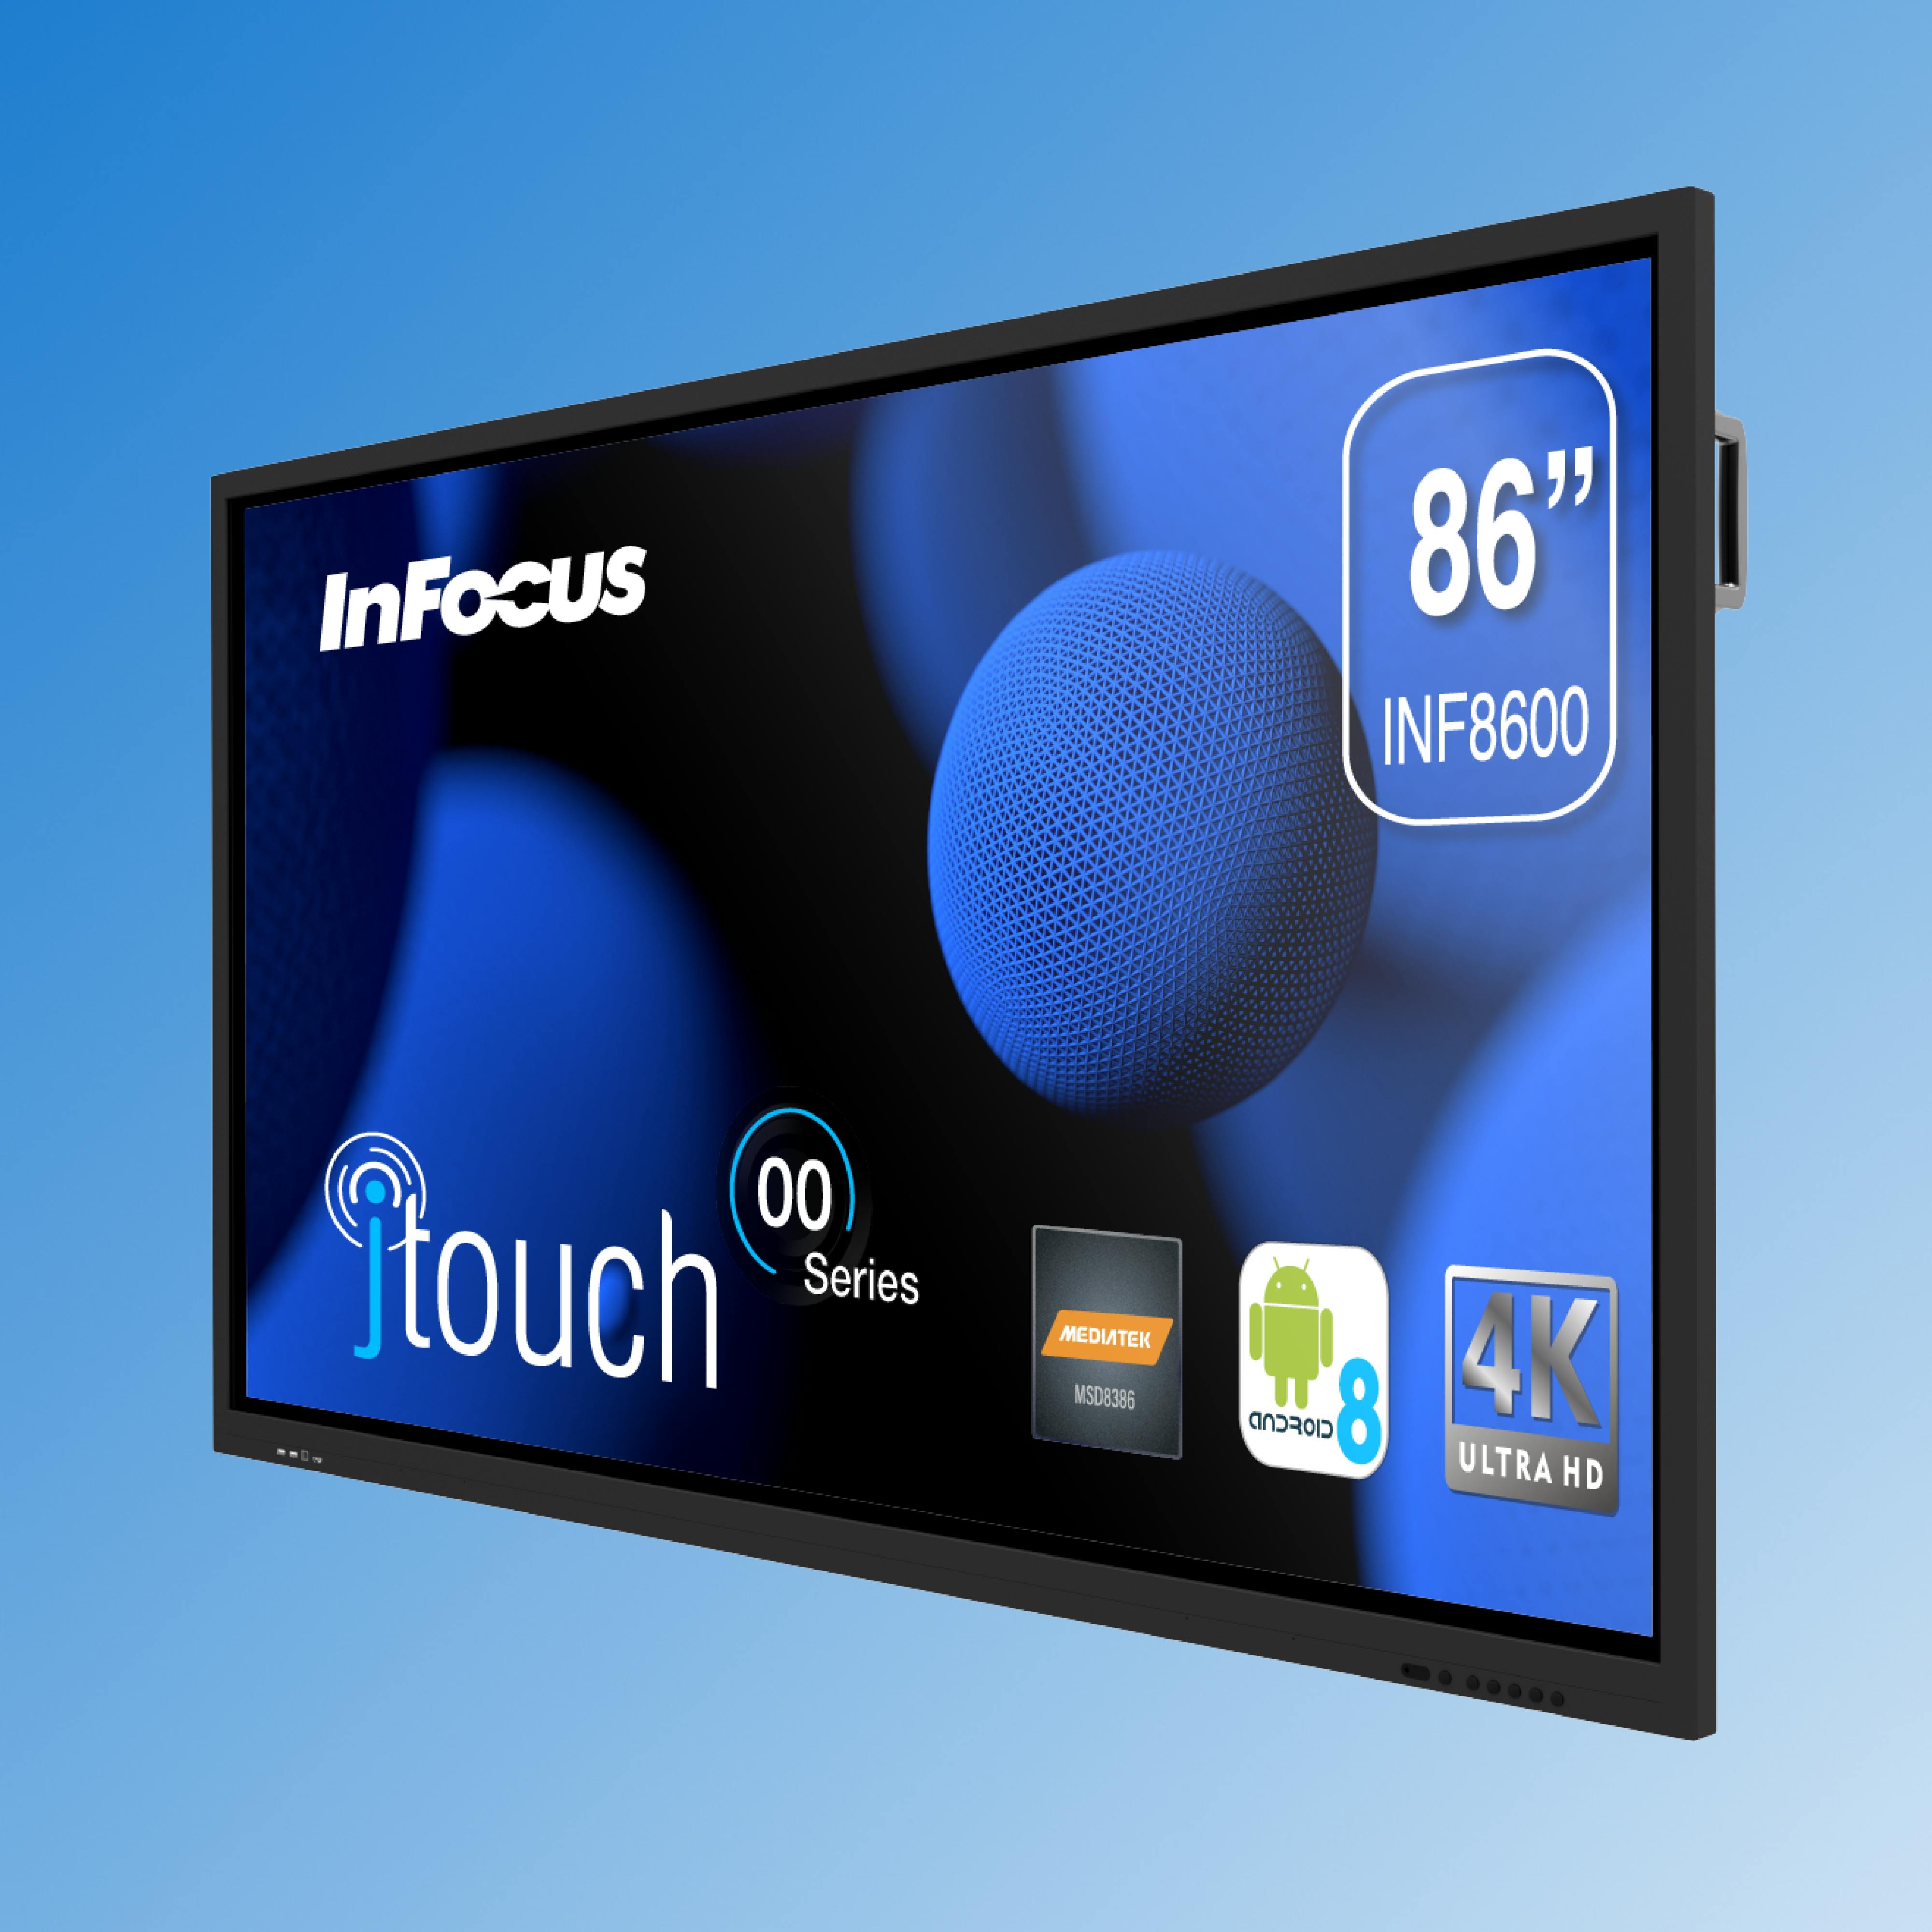 JTouch Series 00 - INF8600